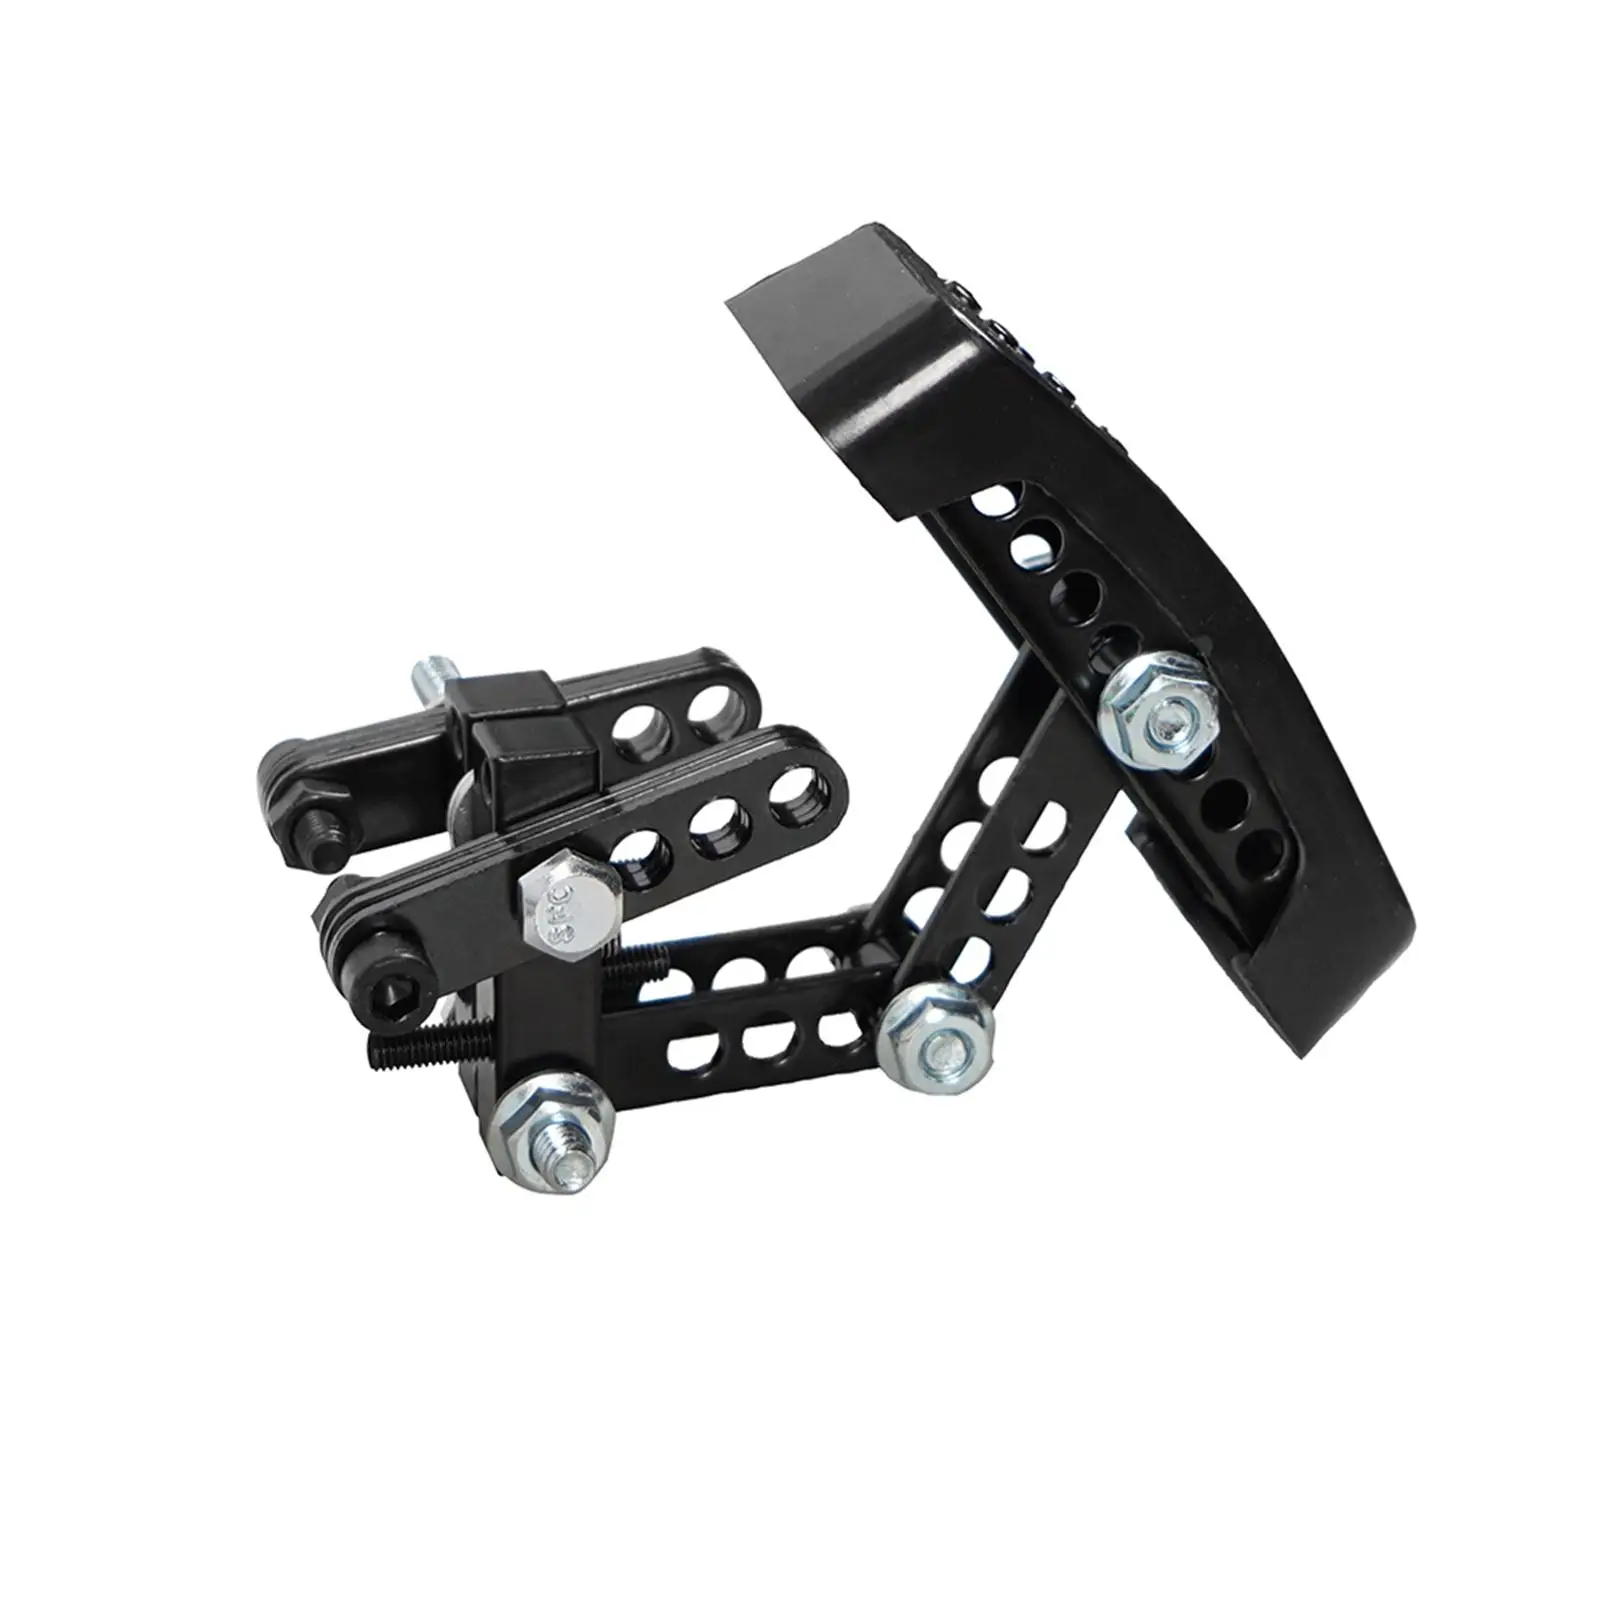 Brake and Pedals Extender Pedal Extension Enlarge Pedal Assembly for Short Drivers Accessories Replacement